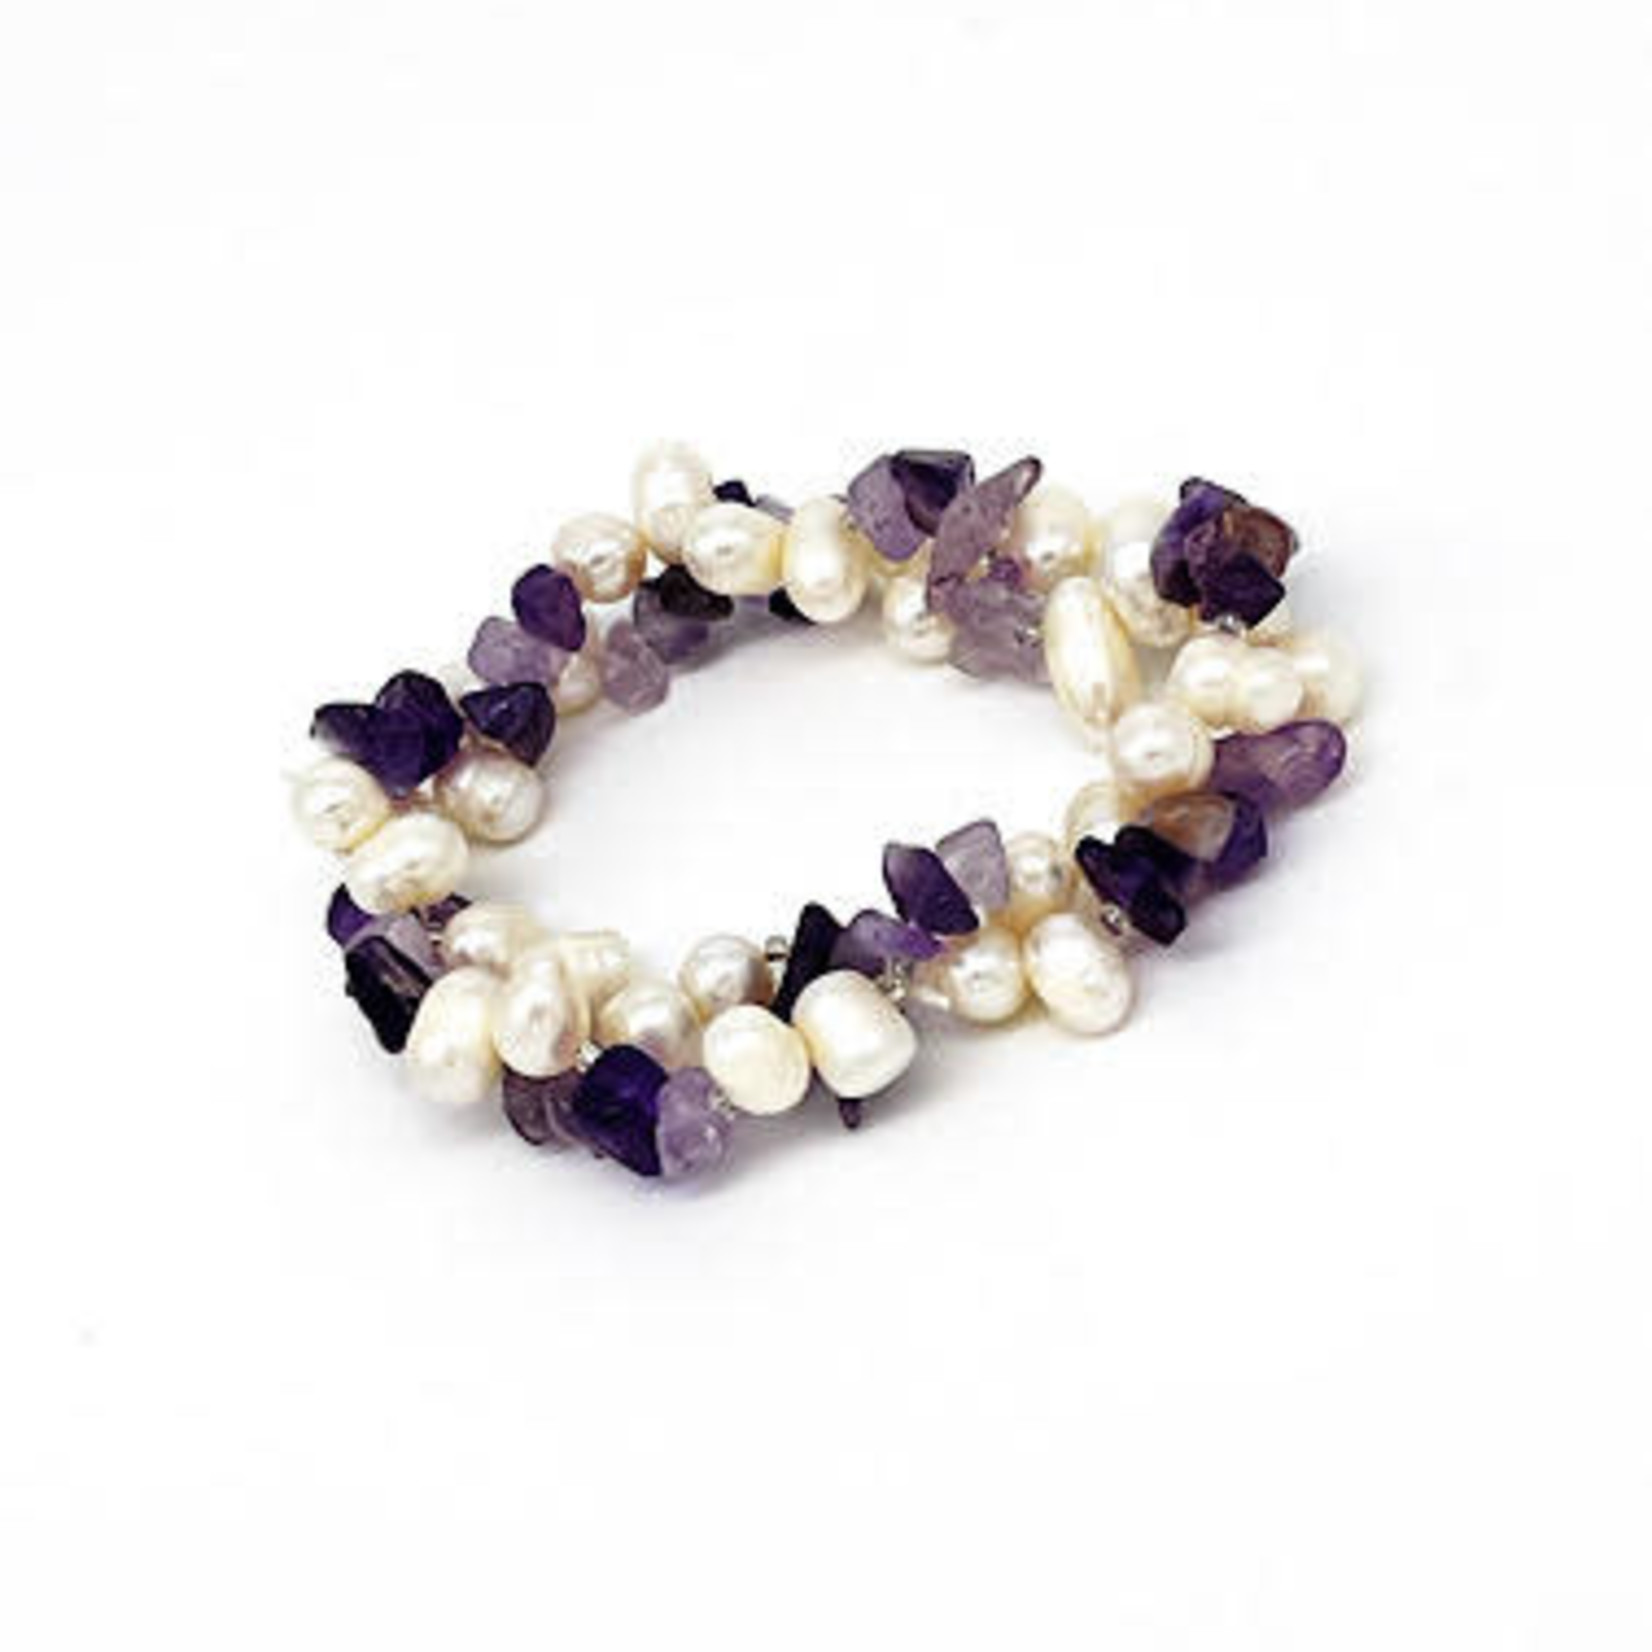 Pearl and Gemstone Chip Stretch Bracelet Amethyst/White Pearl